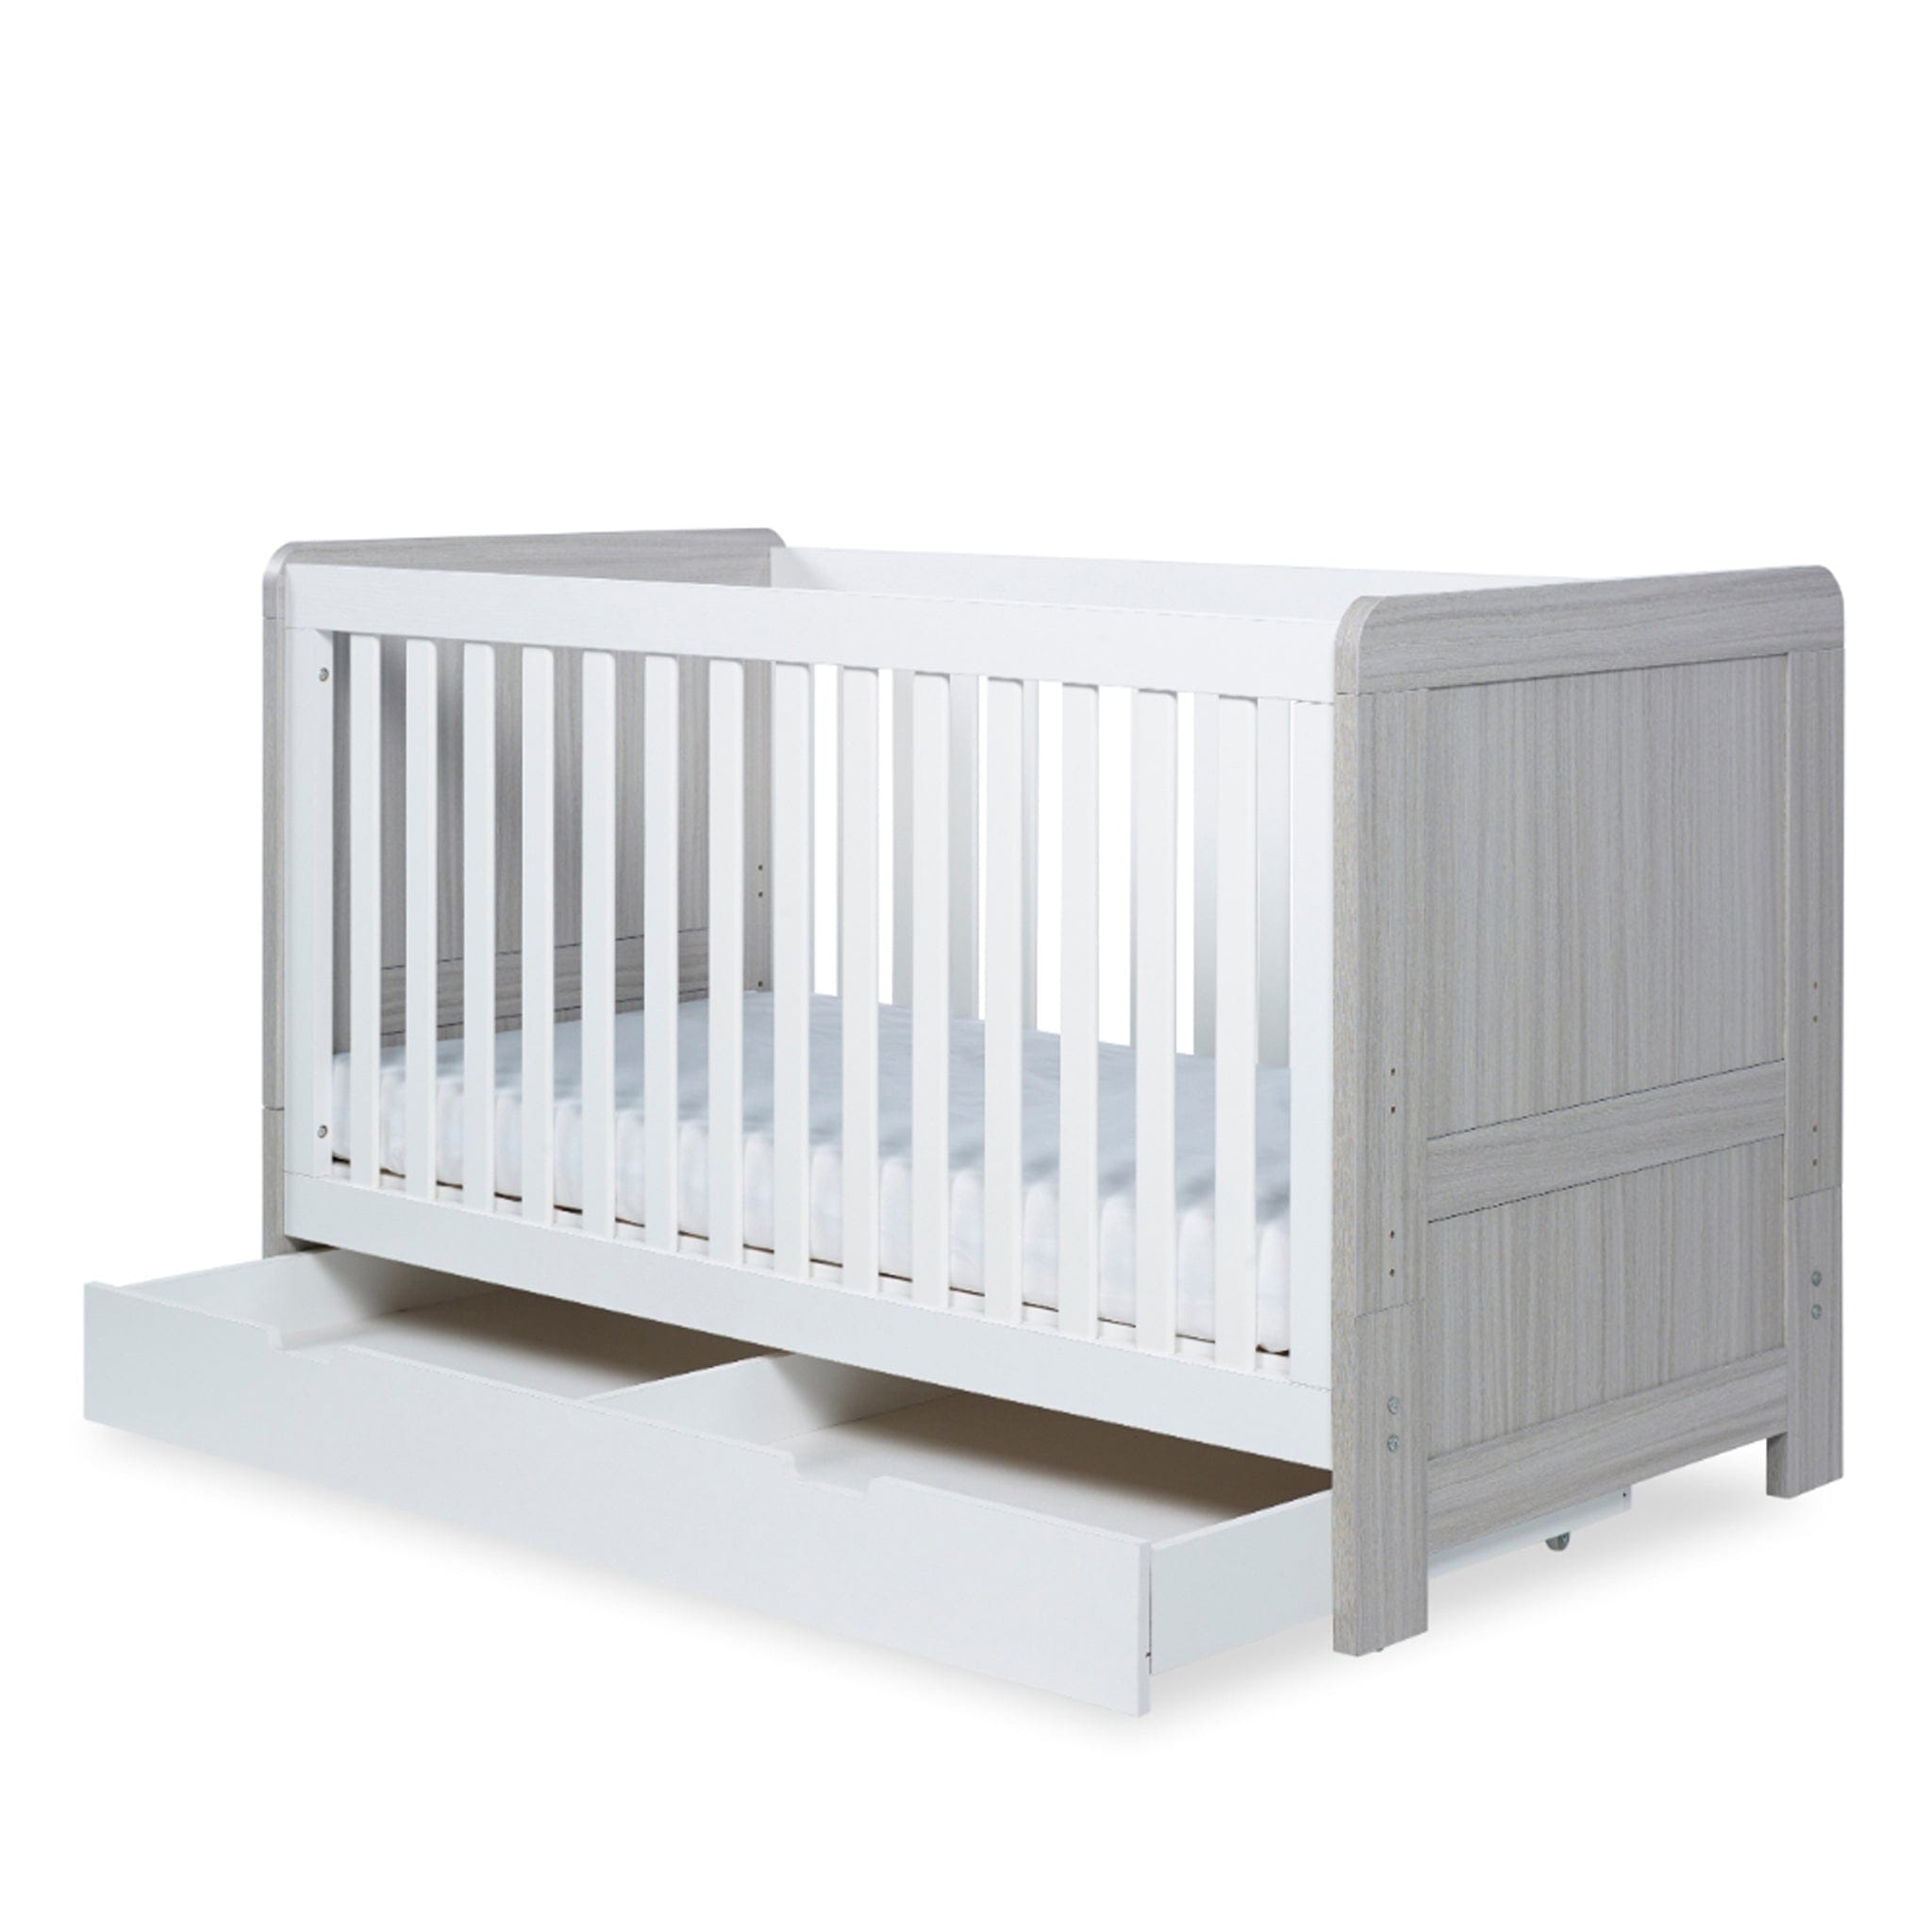 Ickle Bubba Nursery Room Sets Ickle Bubba Pembrey 4 Piece Furniture Set and Under Drawer Ash Grey & White